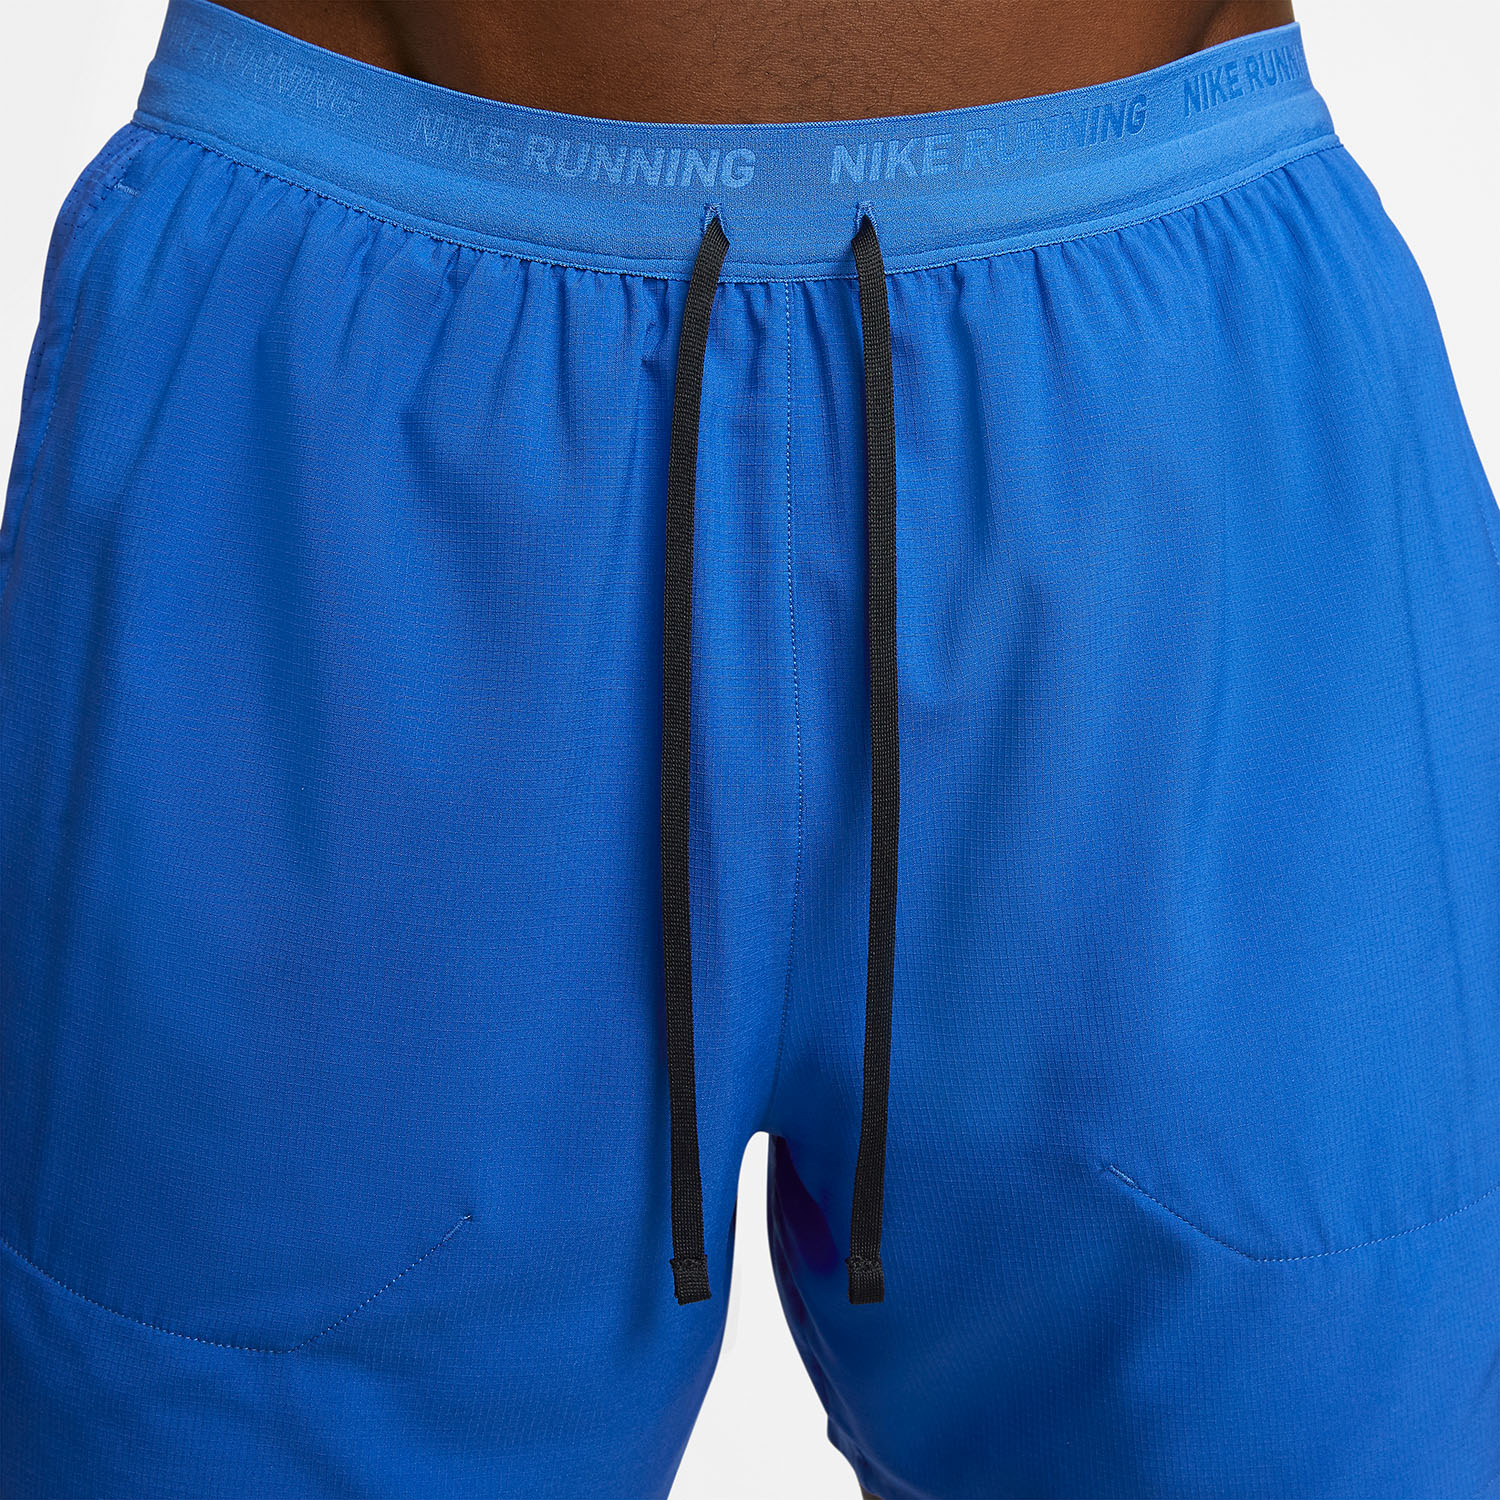 Nike Dri-FIT Stride 5in Shorts - Game Royal/Black/Reflective Silver